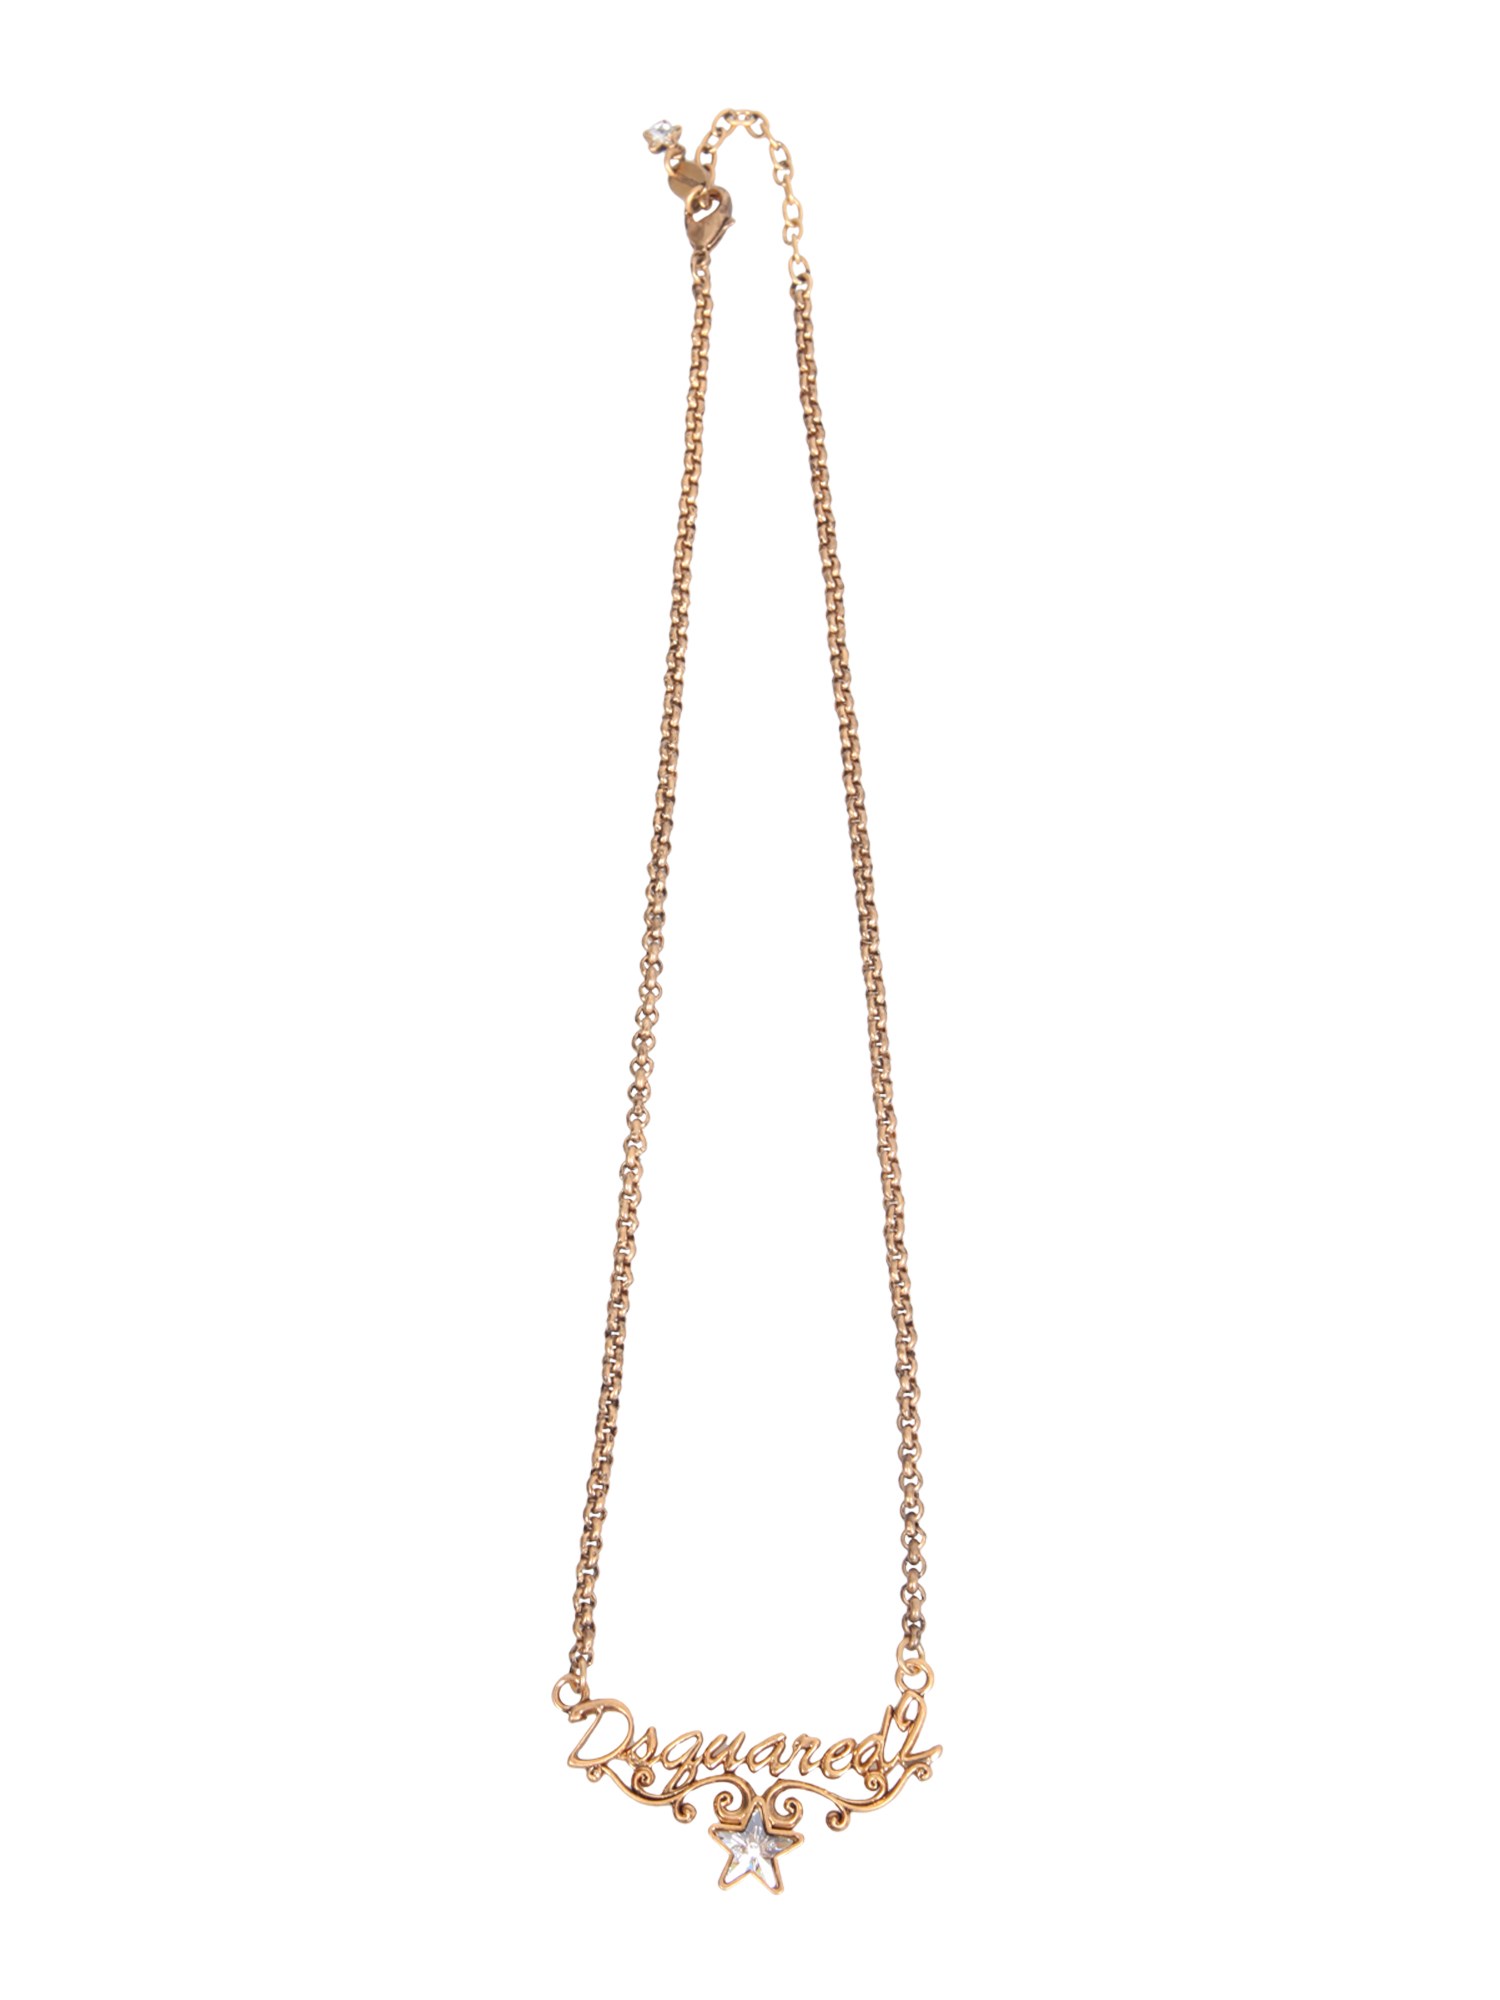 dsquared double chain necklace | SHOPenauer